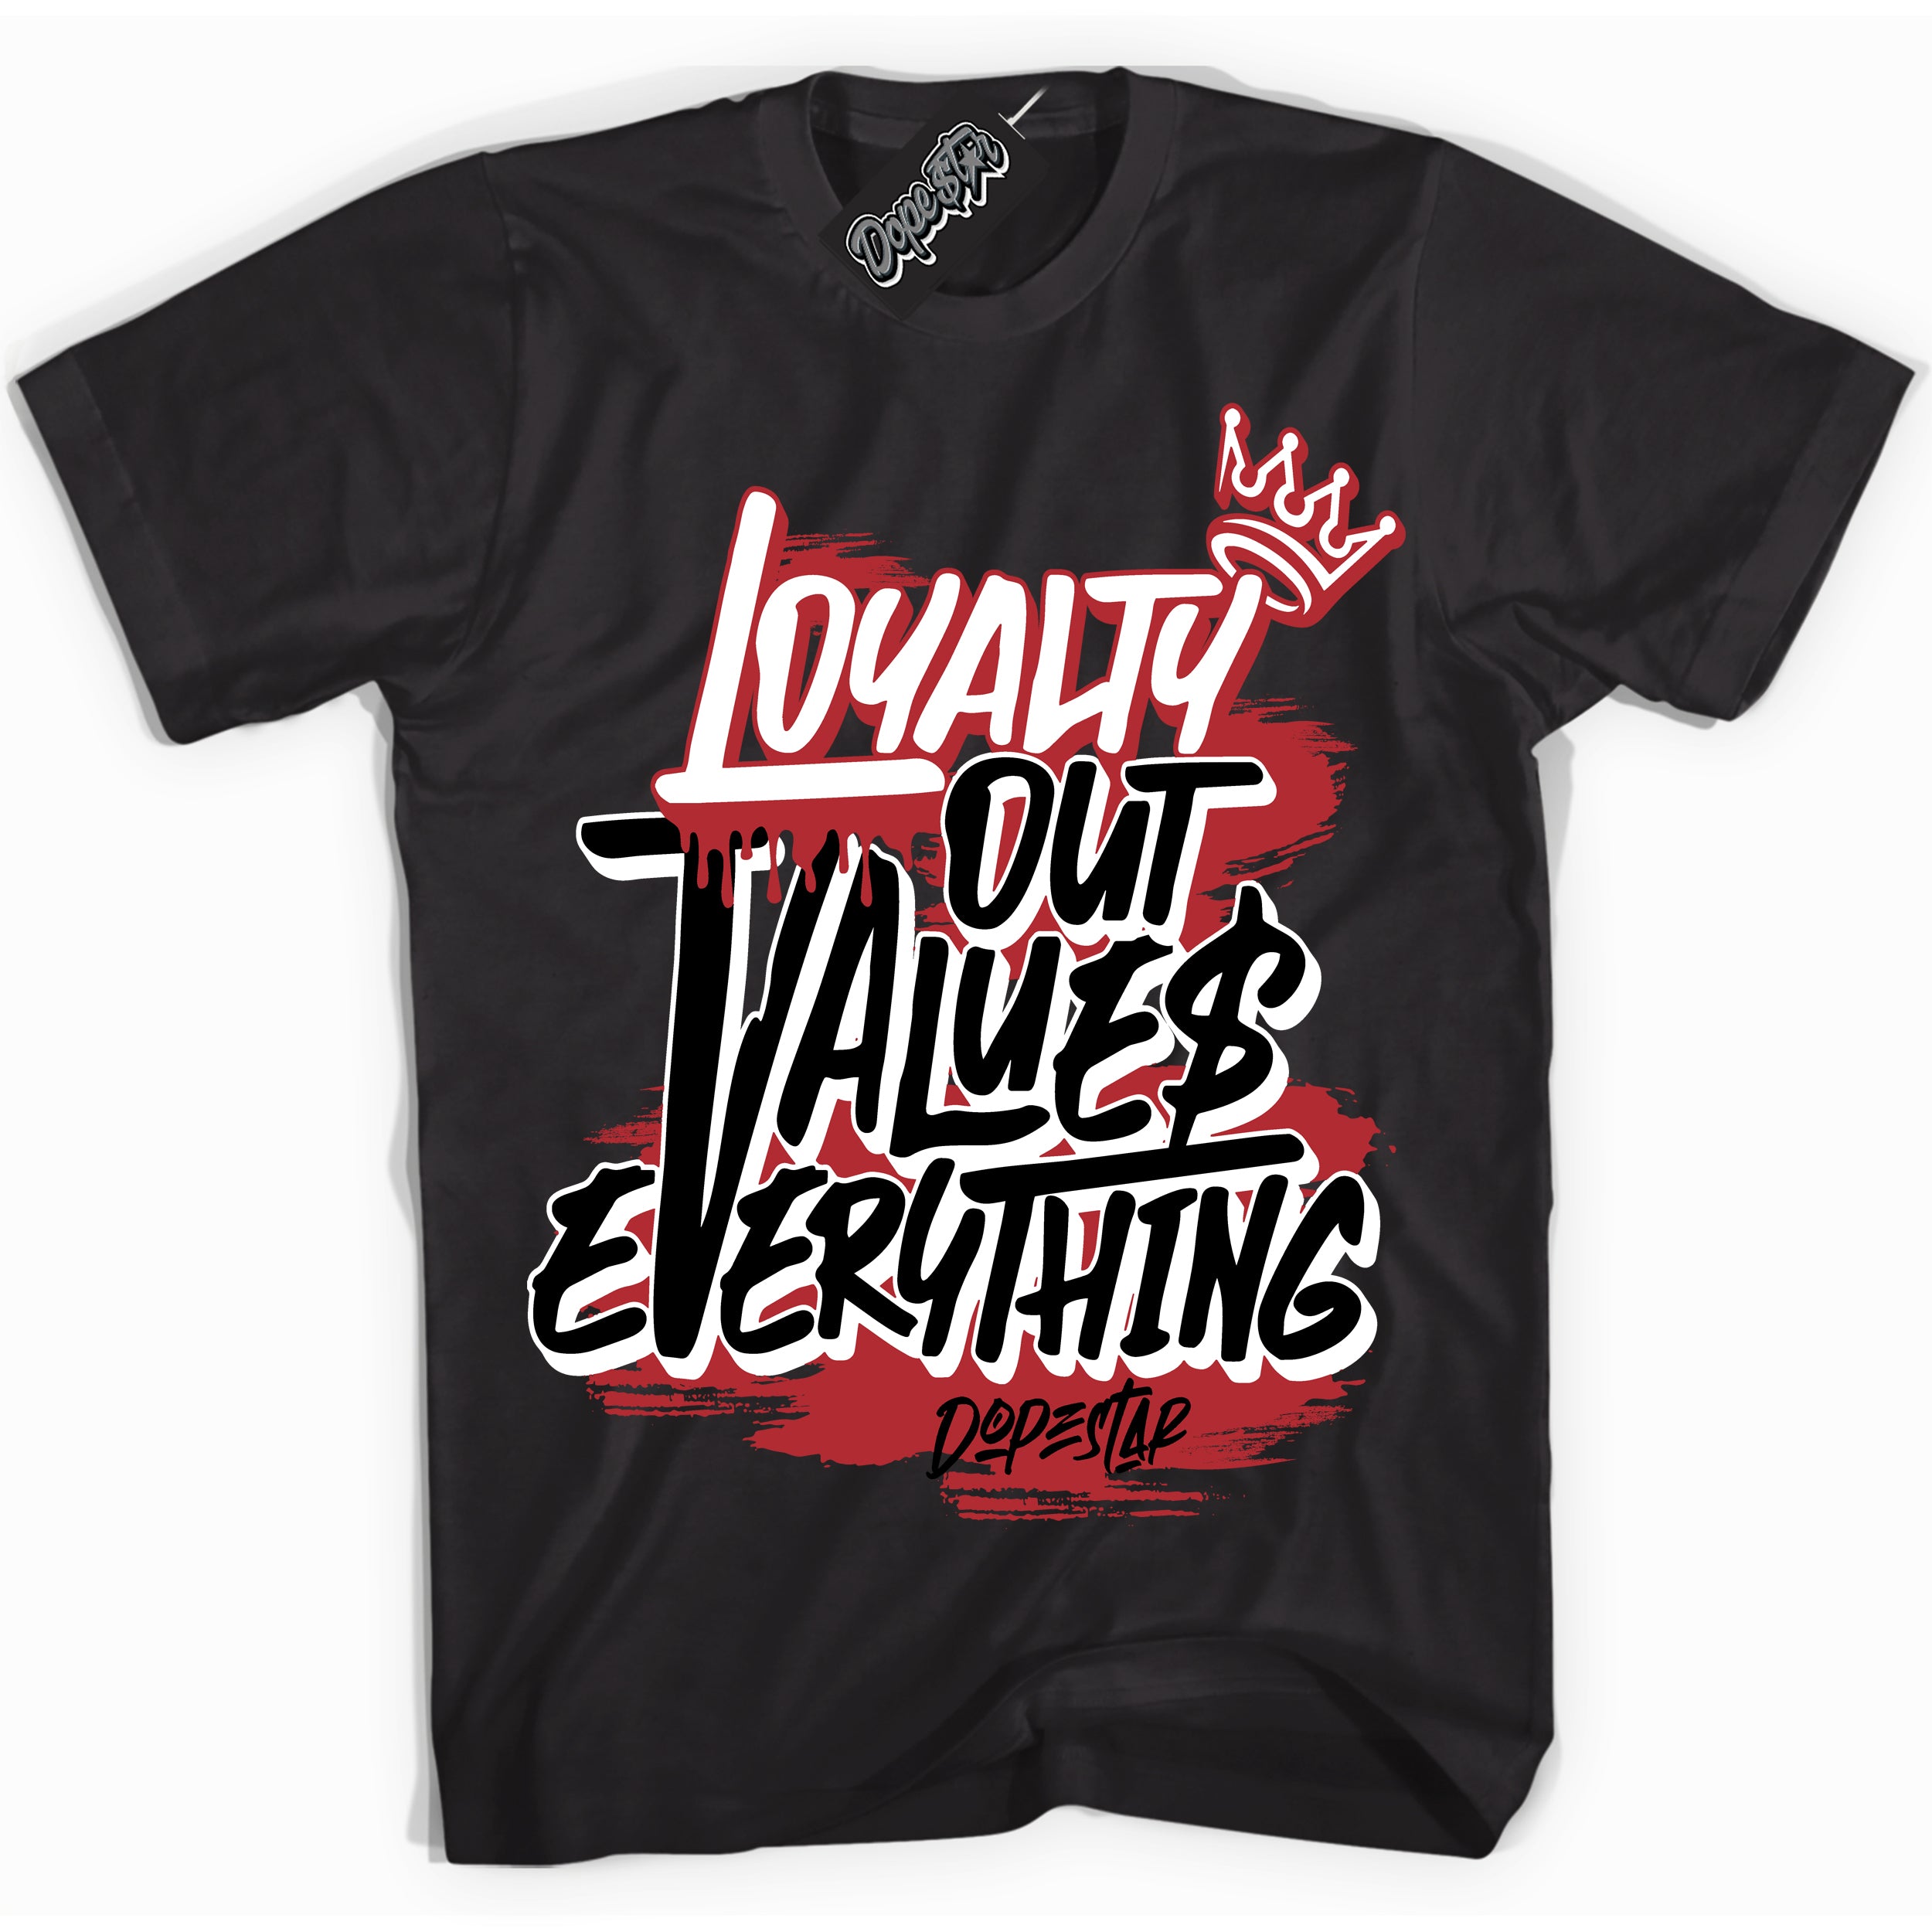 Cool Black Shirt with “ Loyalty Out Values Everything” design that perfectly matches Lost And Found 1s Sneakers.